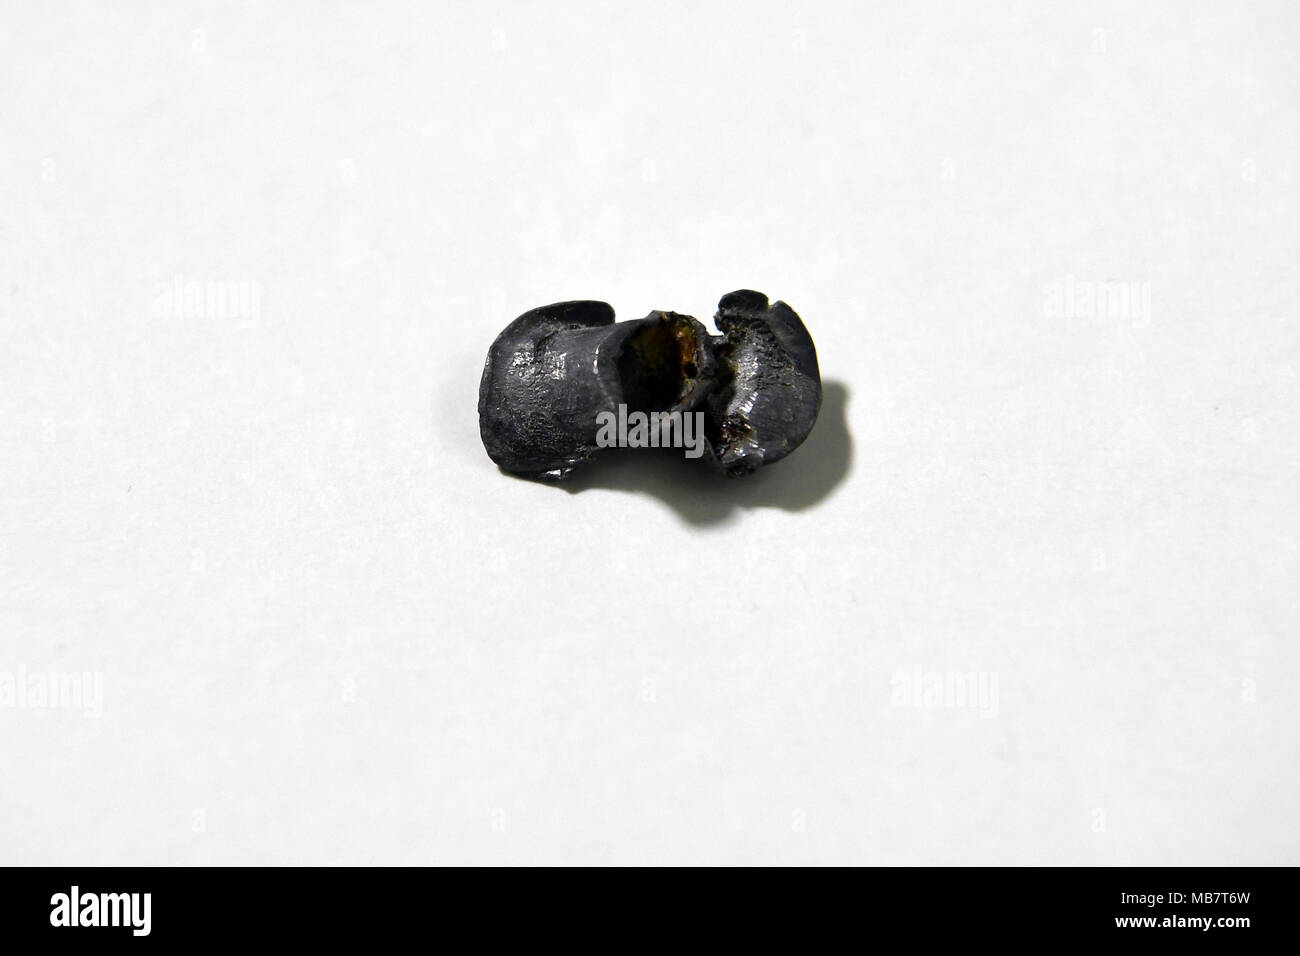 06 April 2018, Germany, Berlin: A bullet from the assasination of Rudi Dutschke is being shown in the police history collection. This bullet was removed from the head of Rudi Dutschke. The exhibition 'Drei Kugeln auf Rudi Dutschke' (lit. three bullets at Rudi Dutschke) from the Berlin police and about the assasination 50 years ago of the student leader. The exhibition will open on 09 April 2018 and will run until the 20 July 2018. Photo: Britta Pedersen/dpa-Zentralbild/dpa Stock Photo